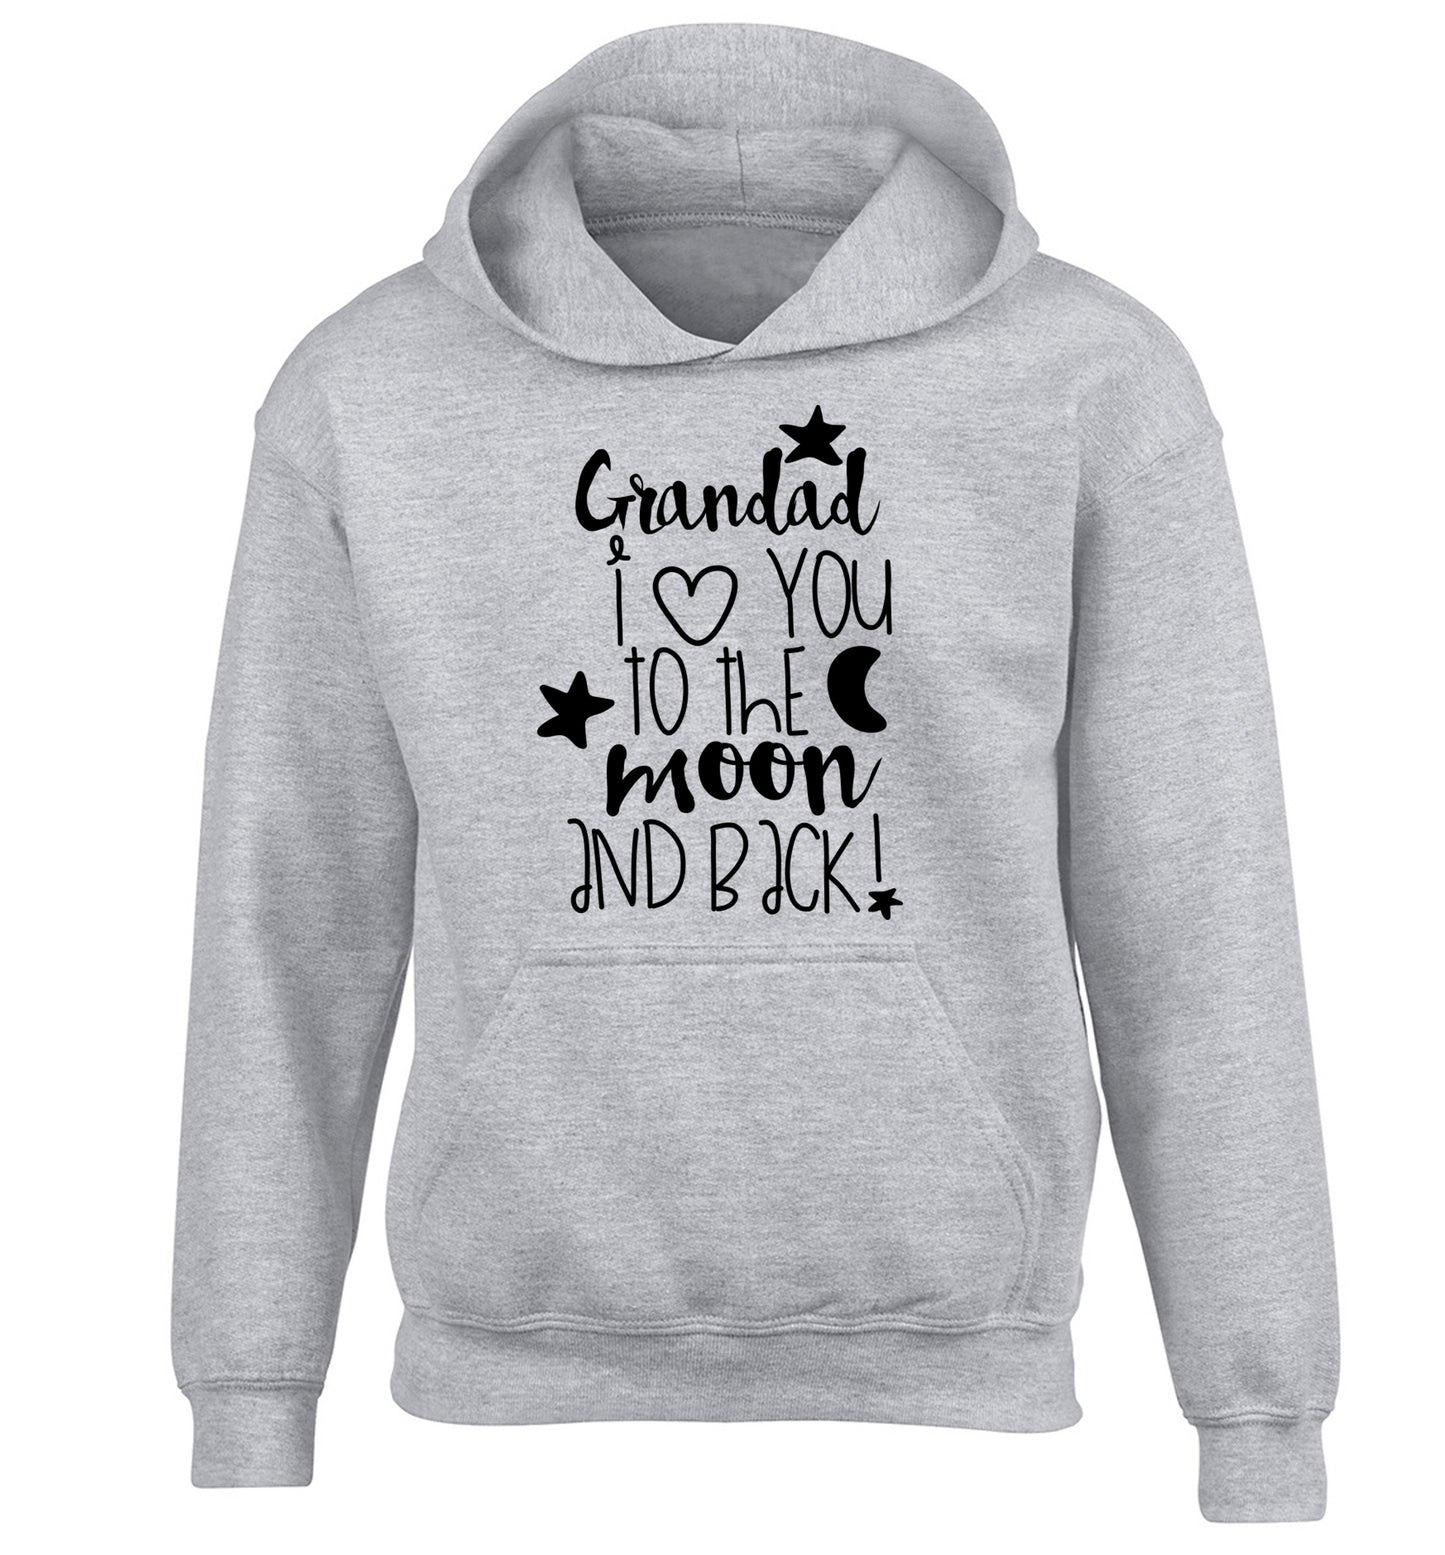 Grandad's I love you to the moon and back children's grey hoodie 12-14 Years